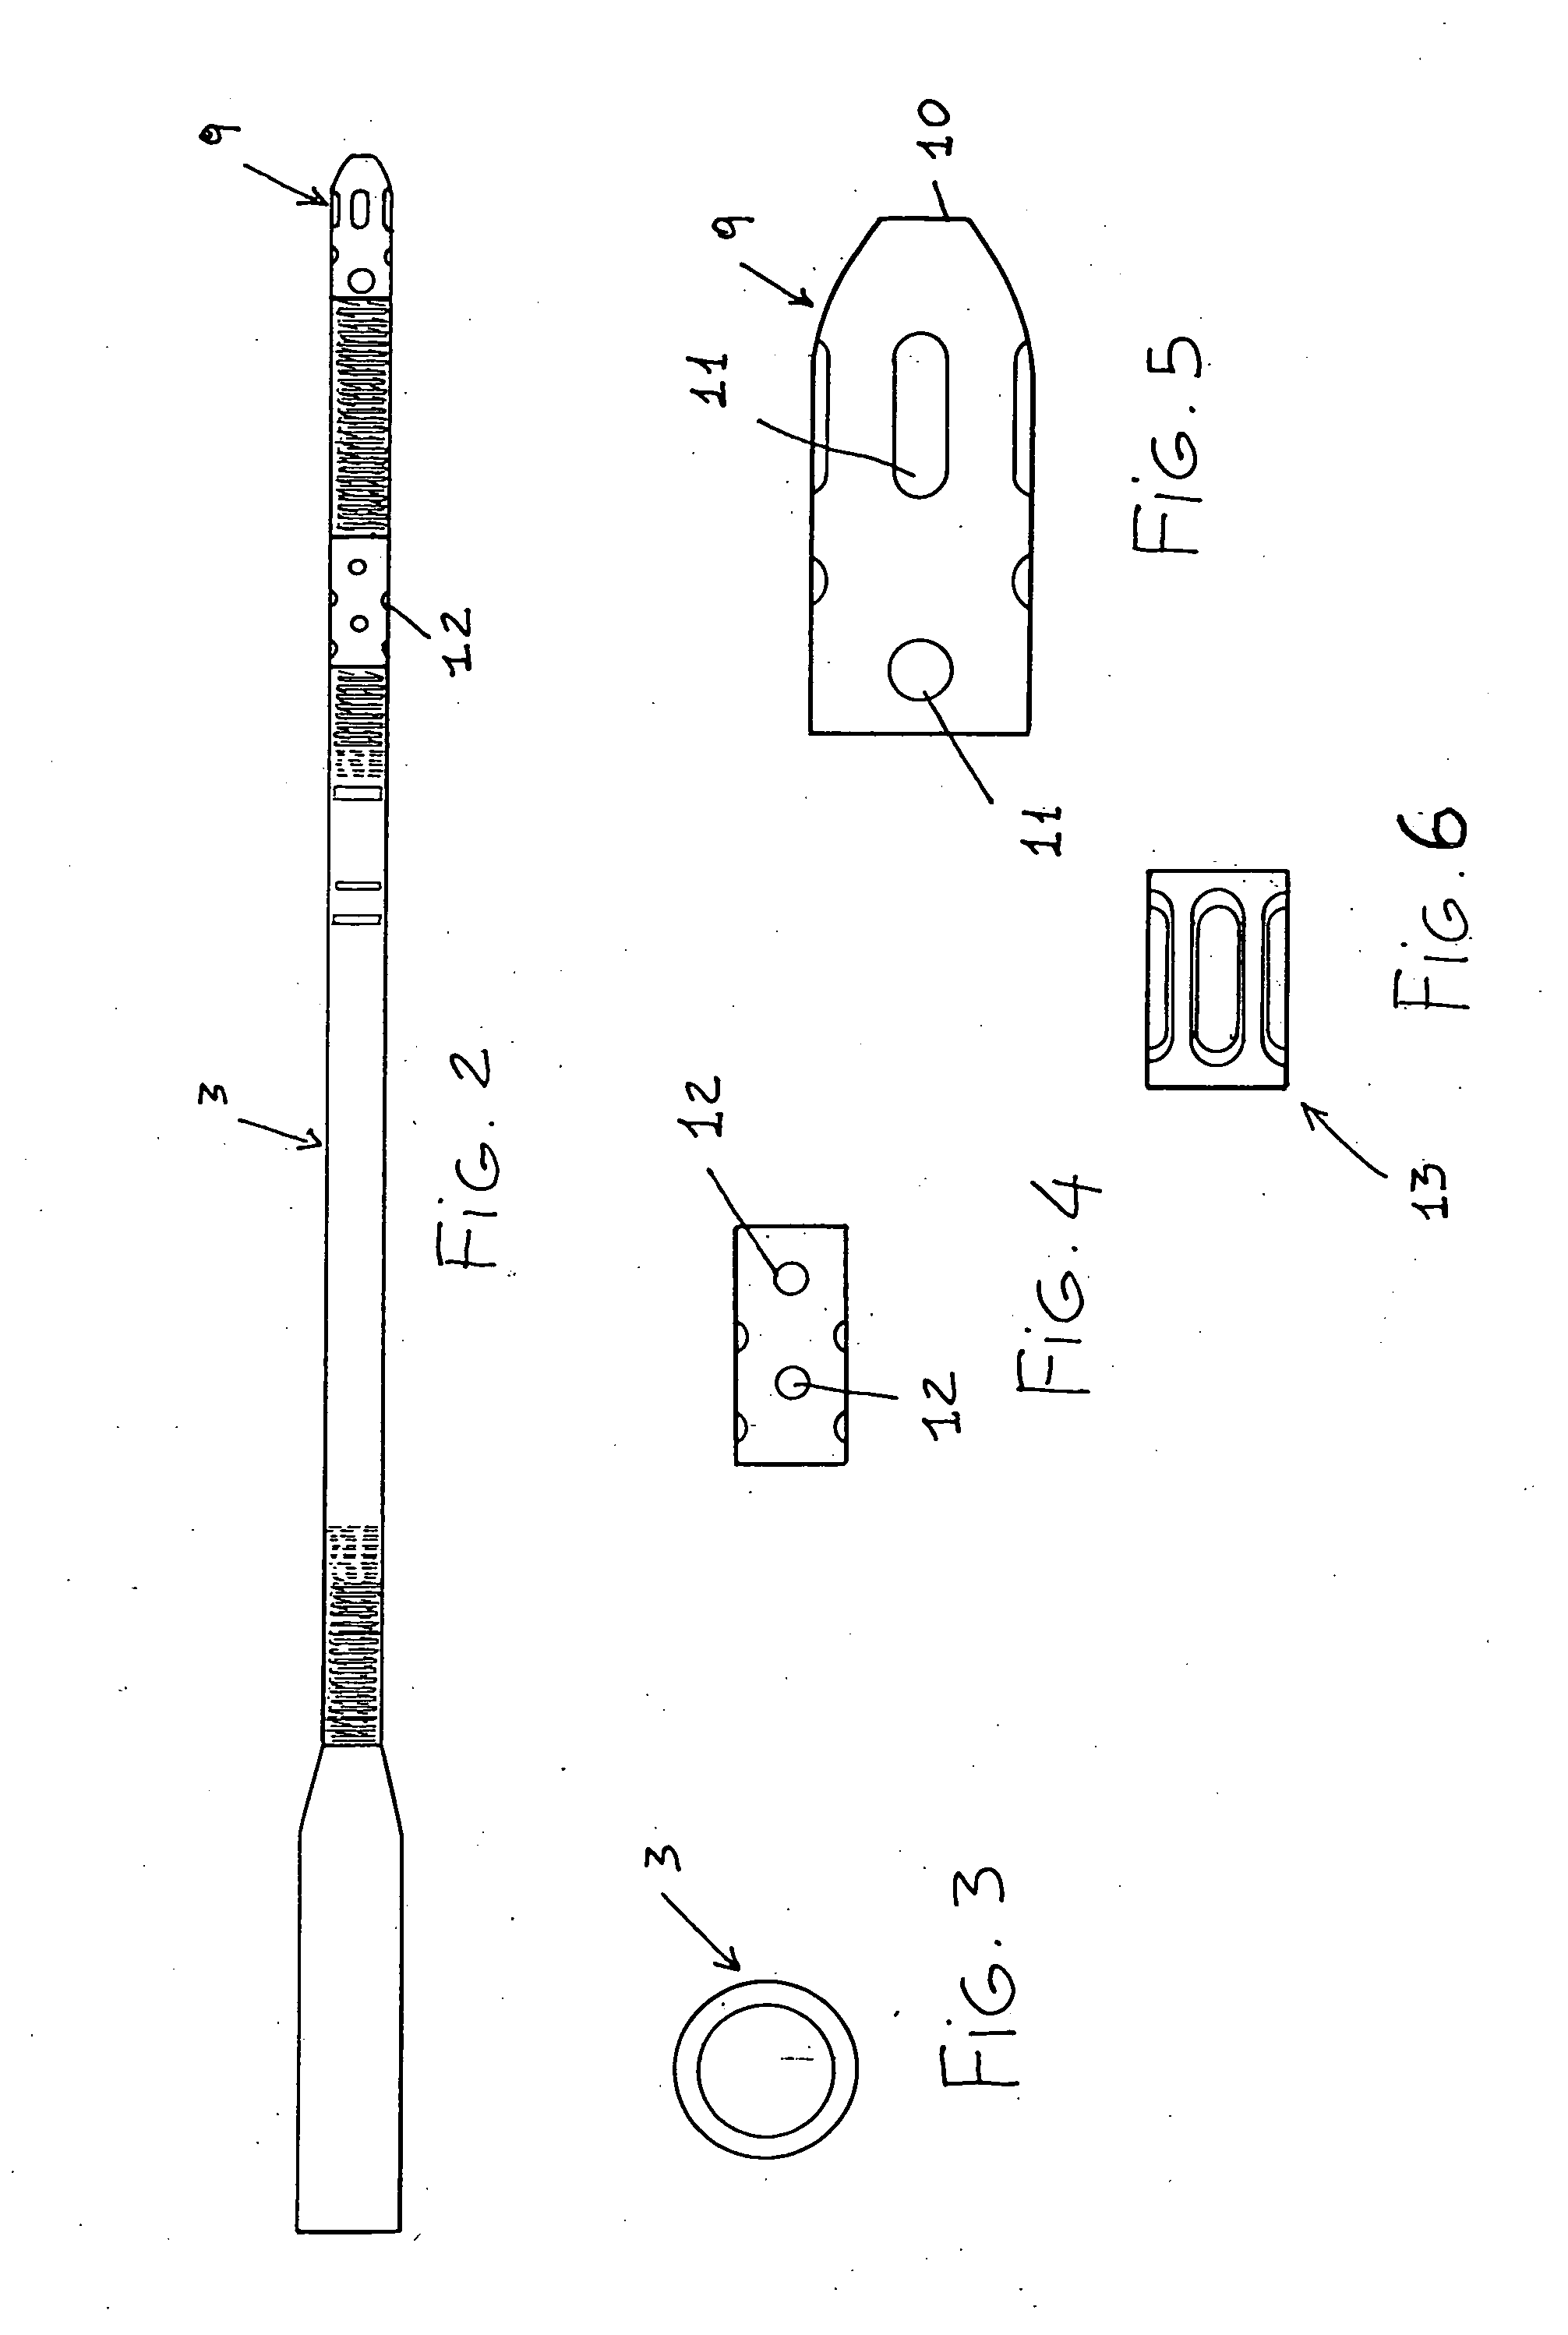 Apparatus for performing myocardial revascularization in a beating heart and left ventricular assistance condition